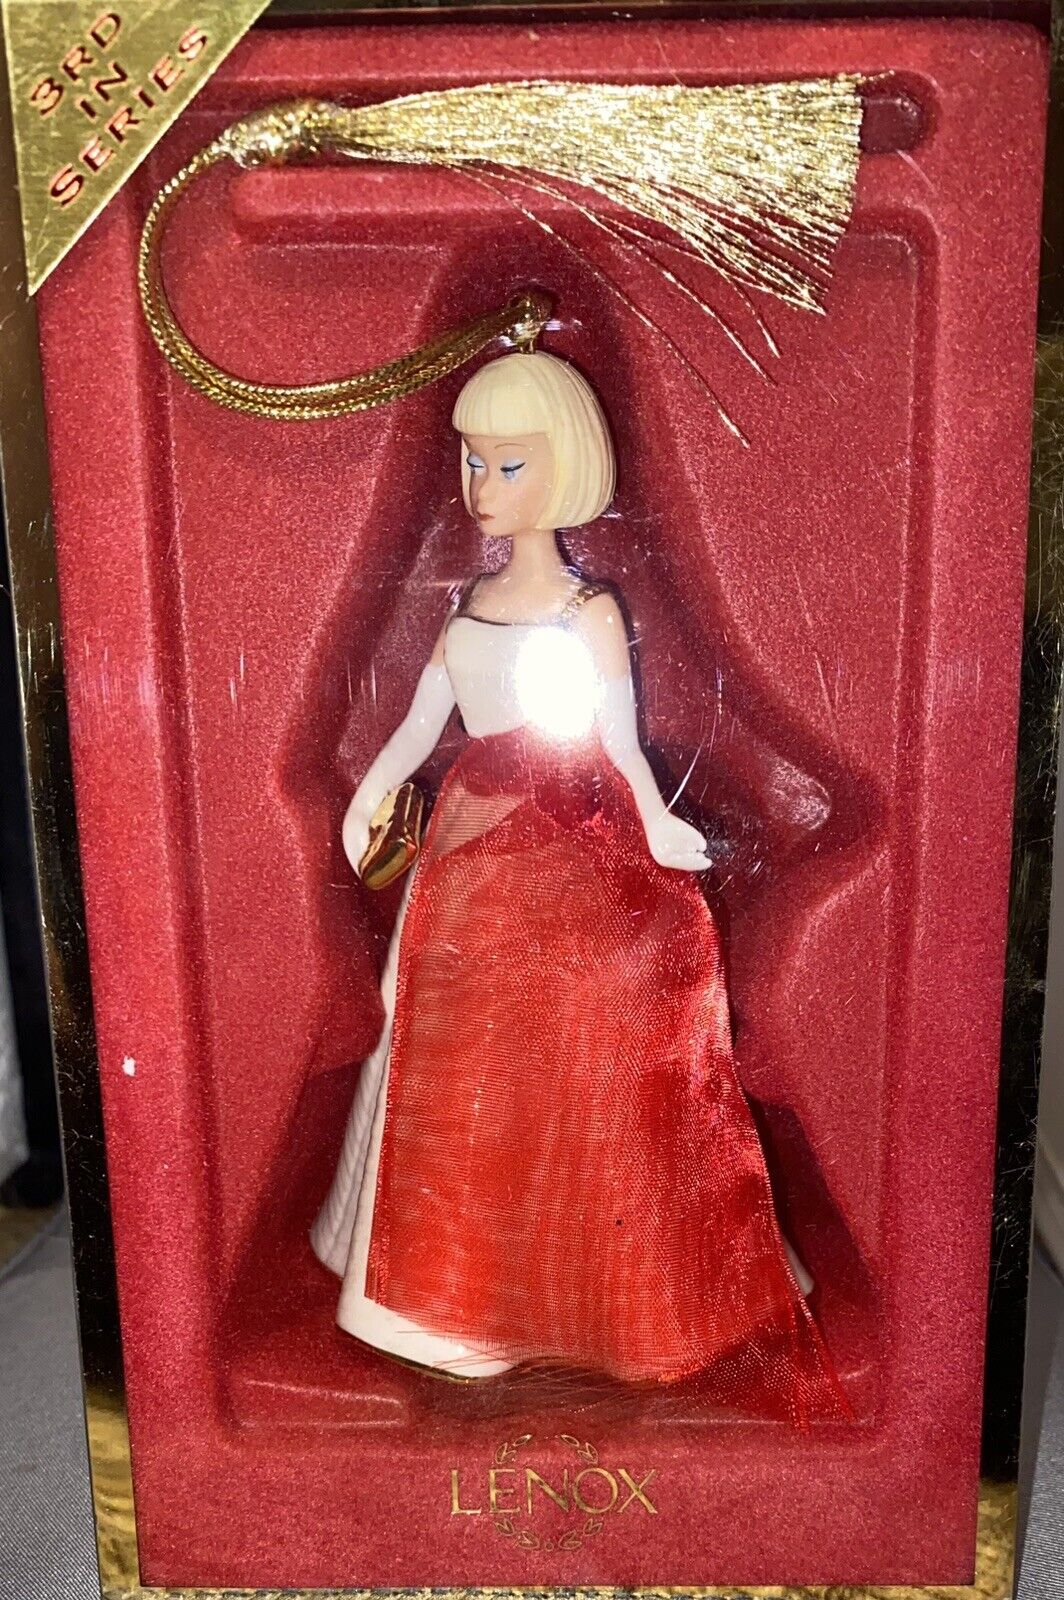 Lenox Barbie Ornament 3rd in Series - Holiday Dance - 2005